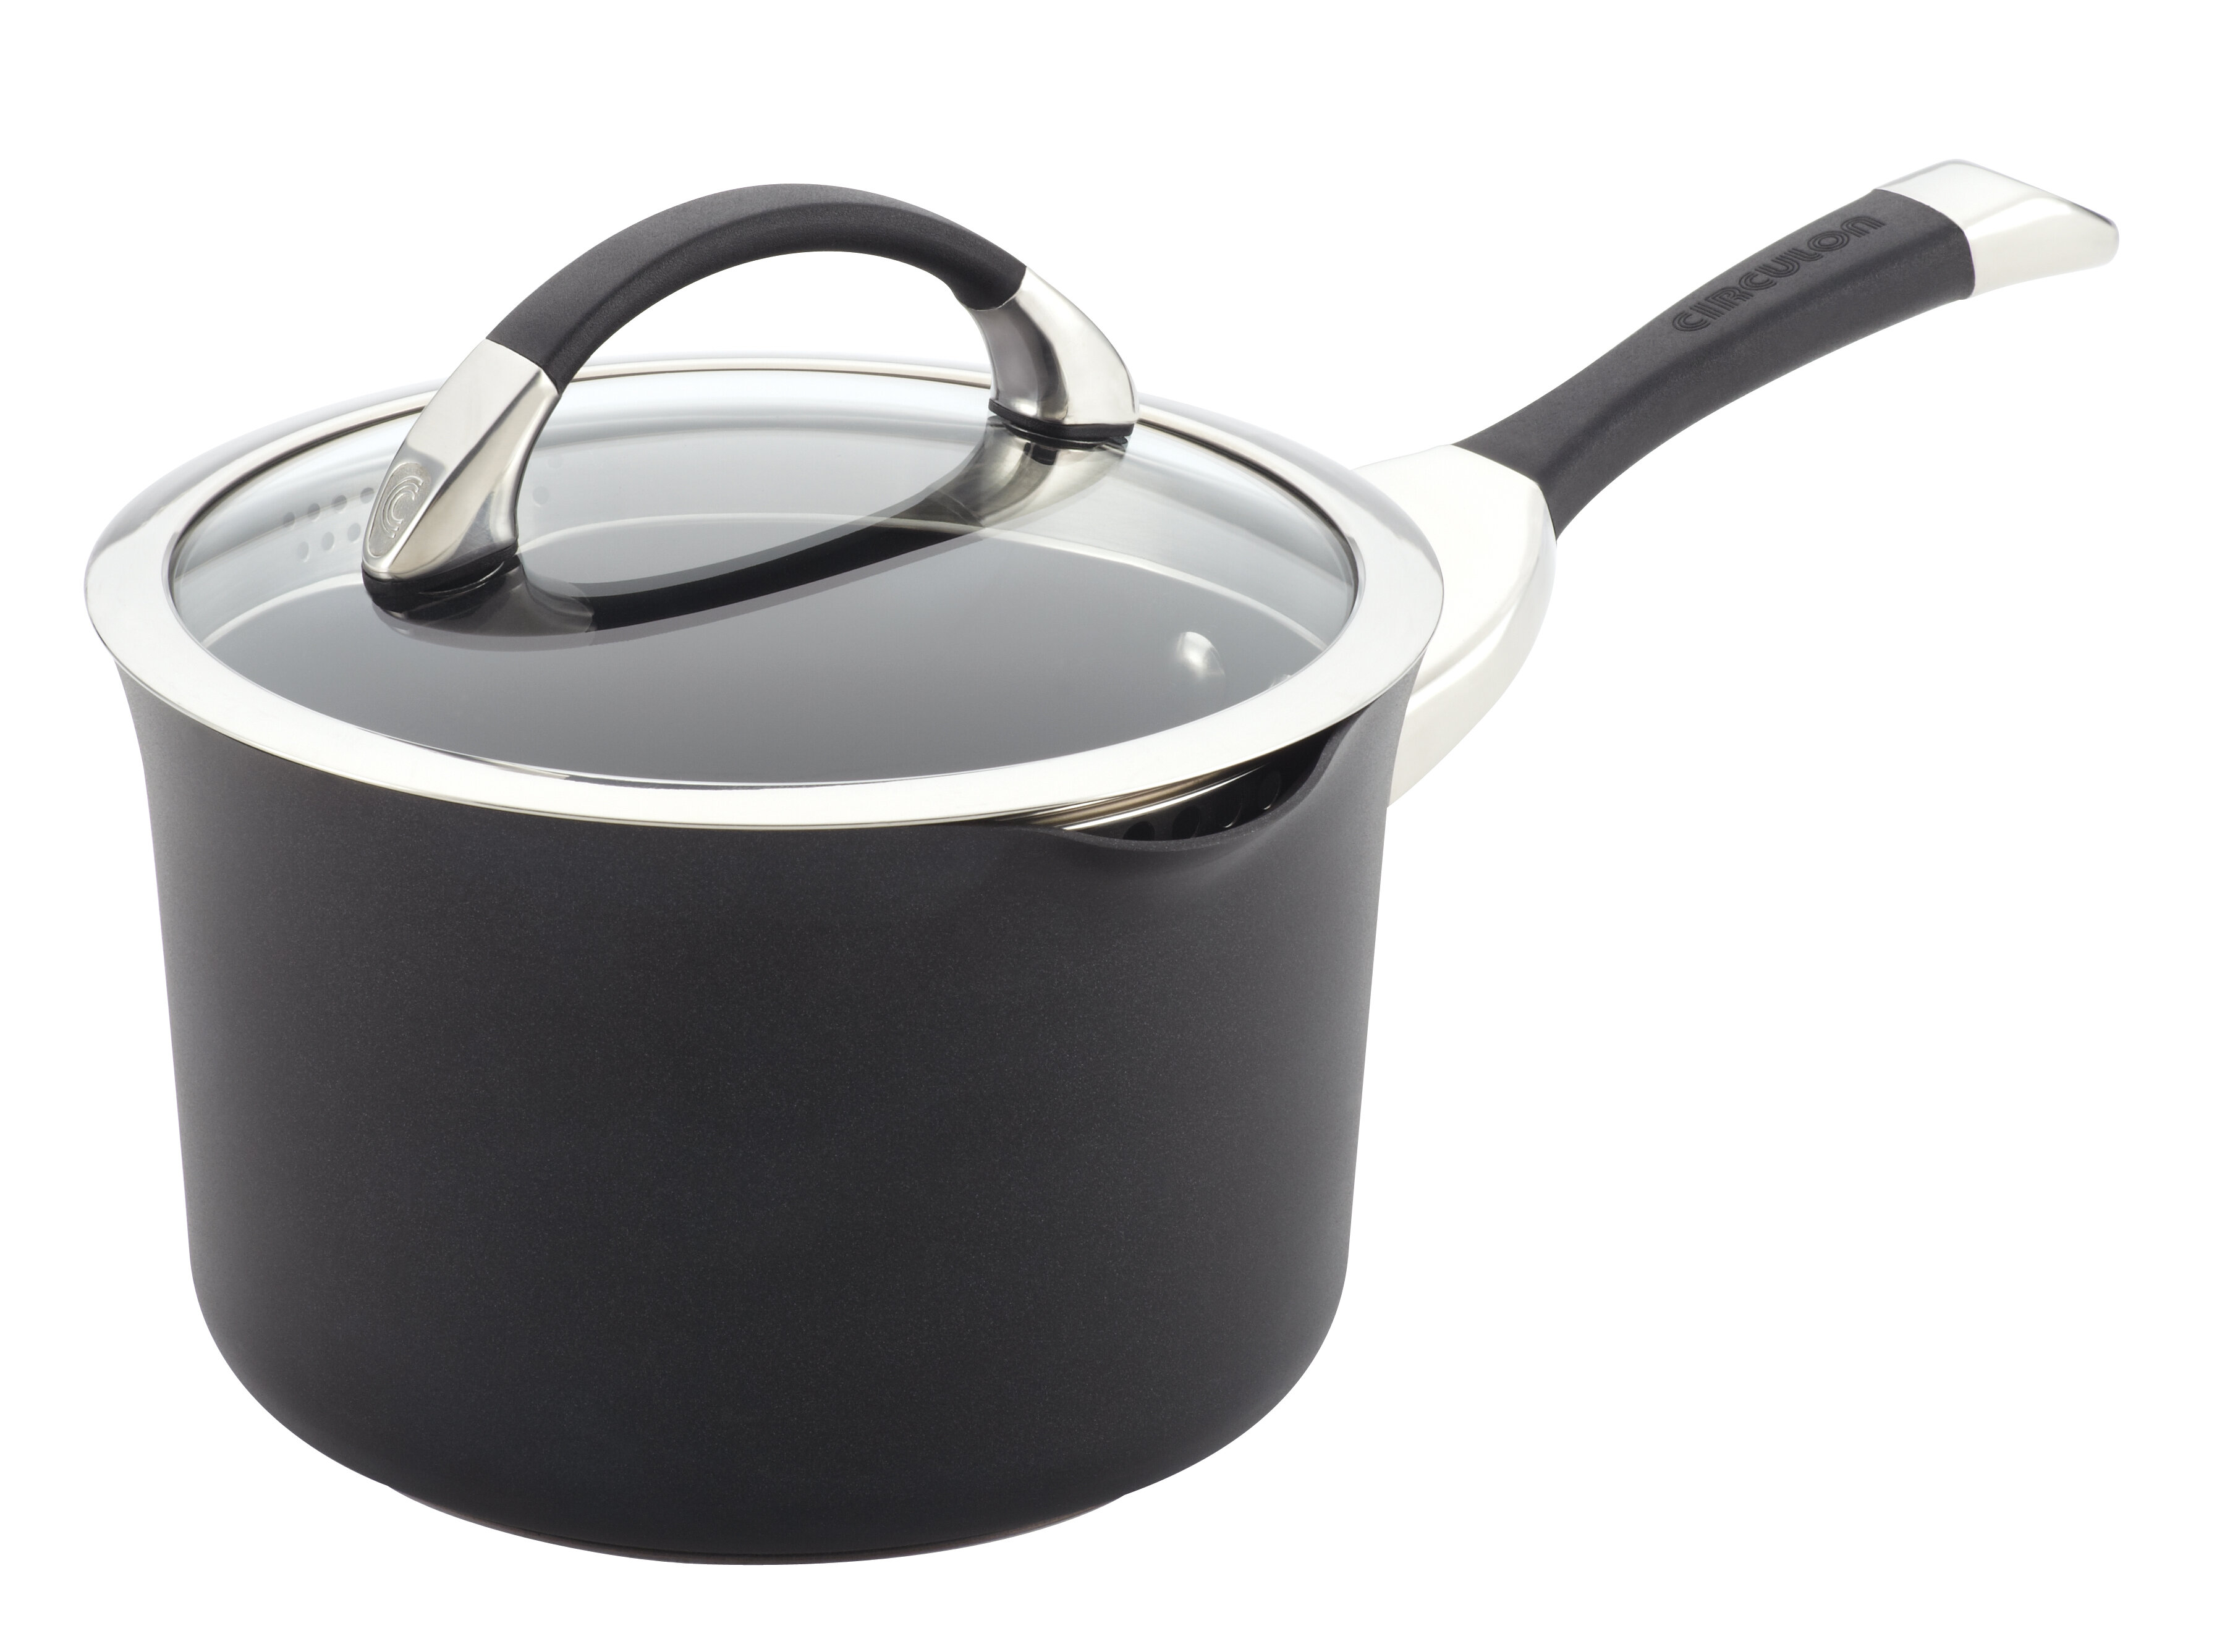 Circulon Symmetry Hard Anodized Nonstick Cookware Review - Consumer Reports